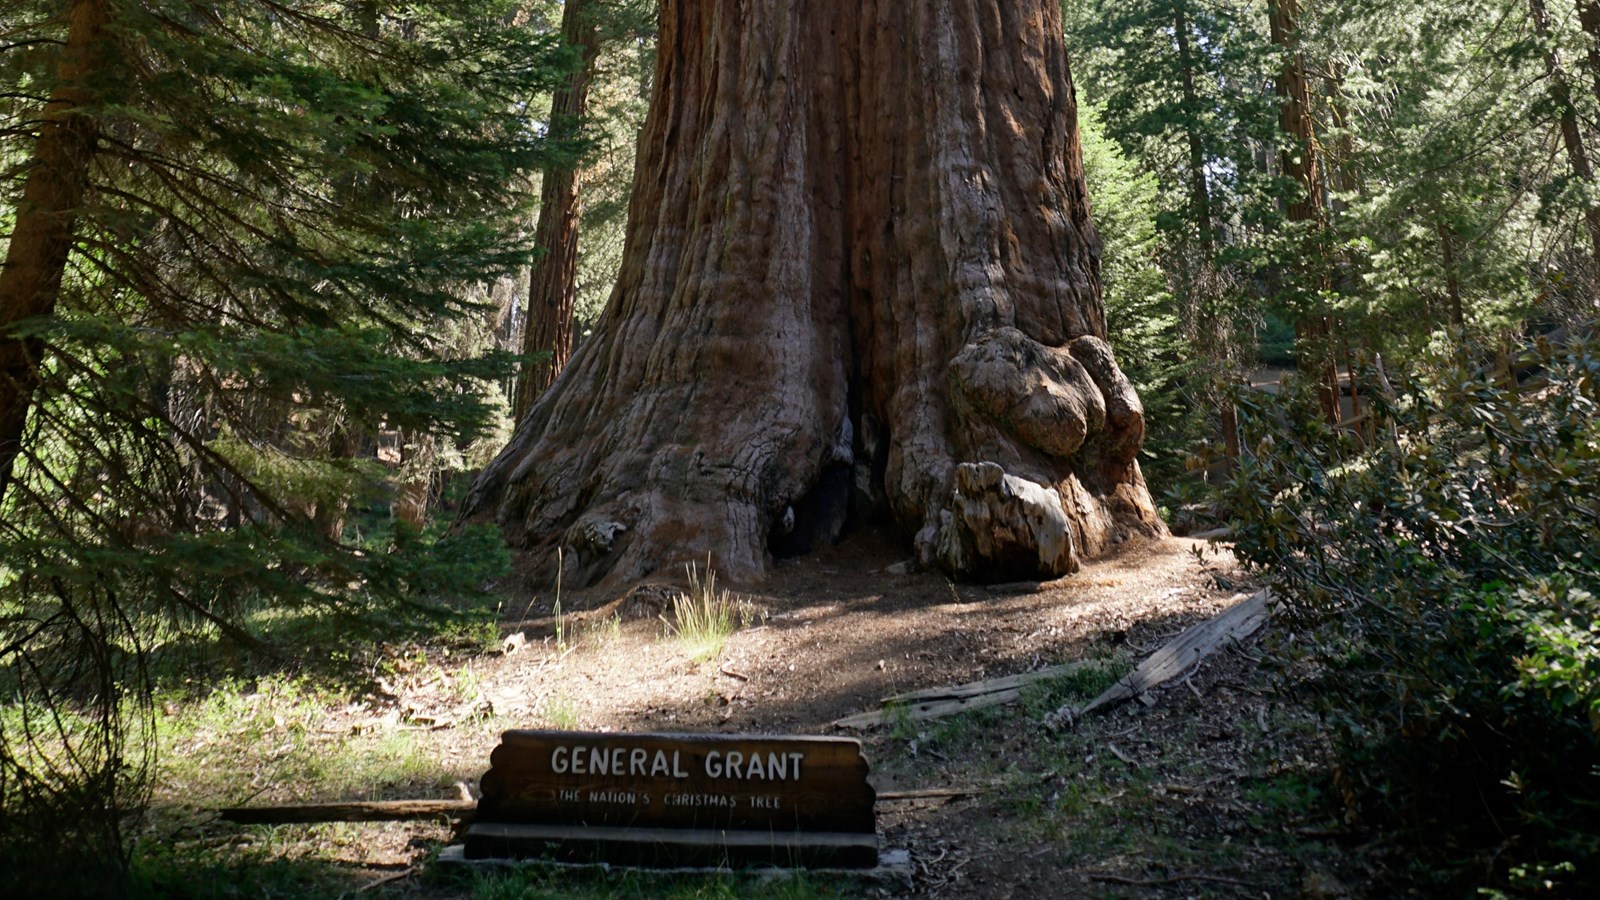 A reddish brown giant sequoia tree stands in front of a wooden sign labeled the General Grant Tree